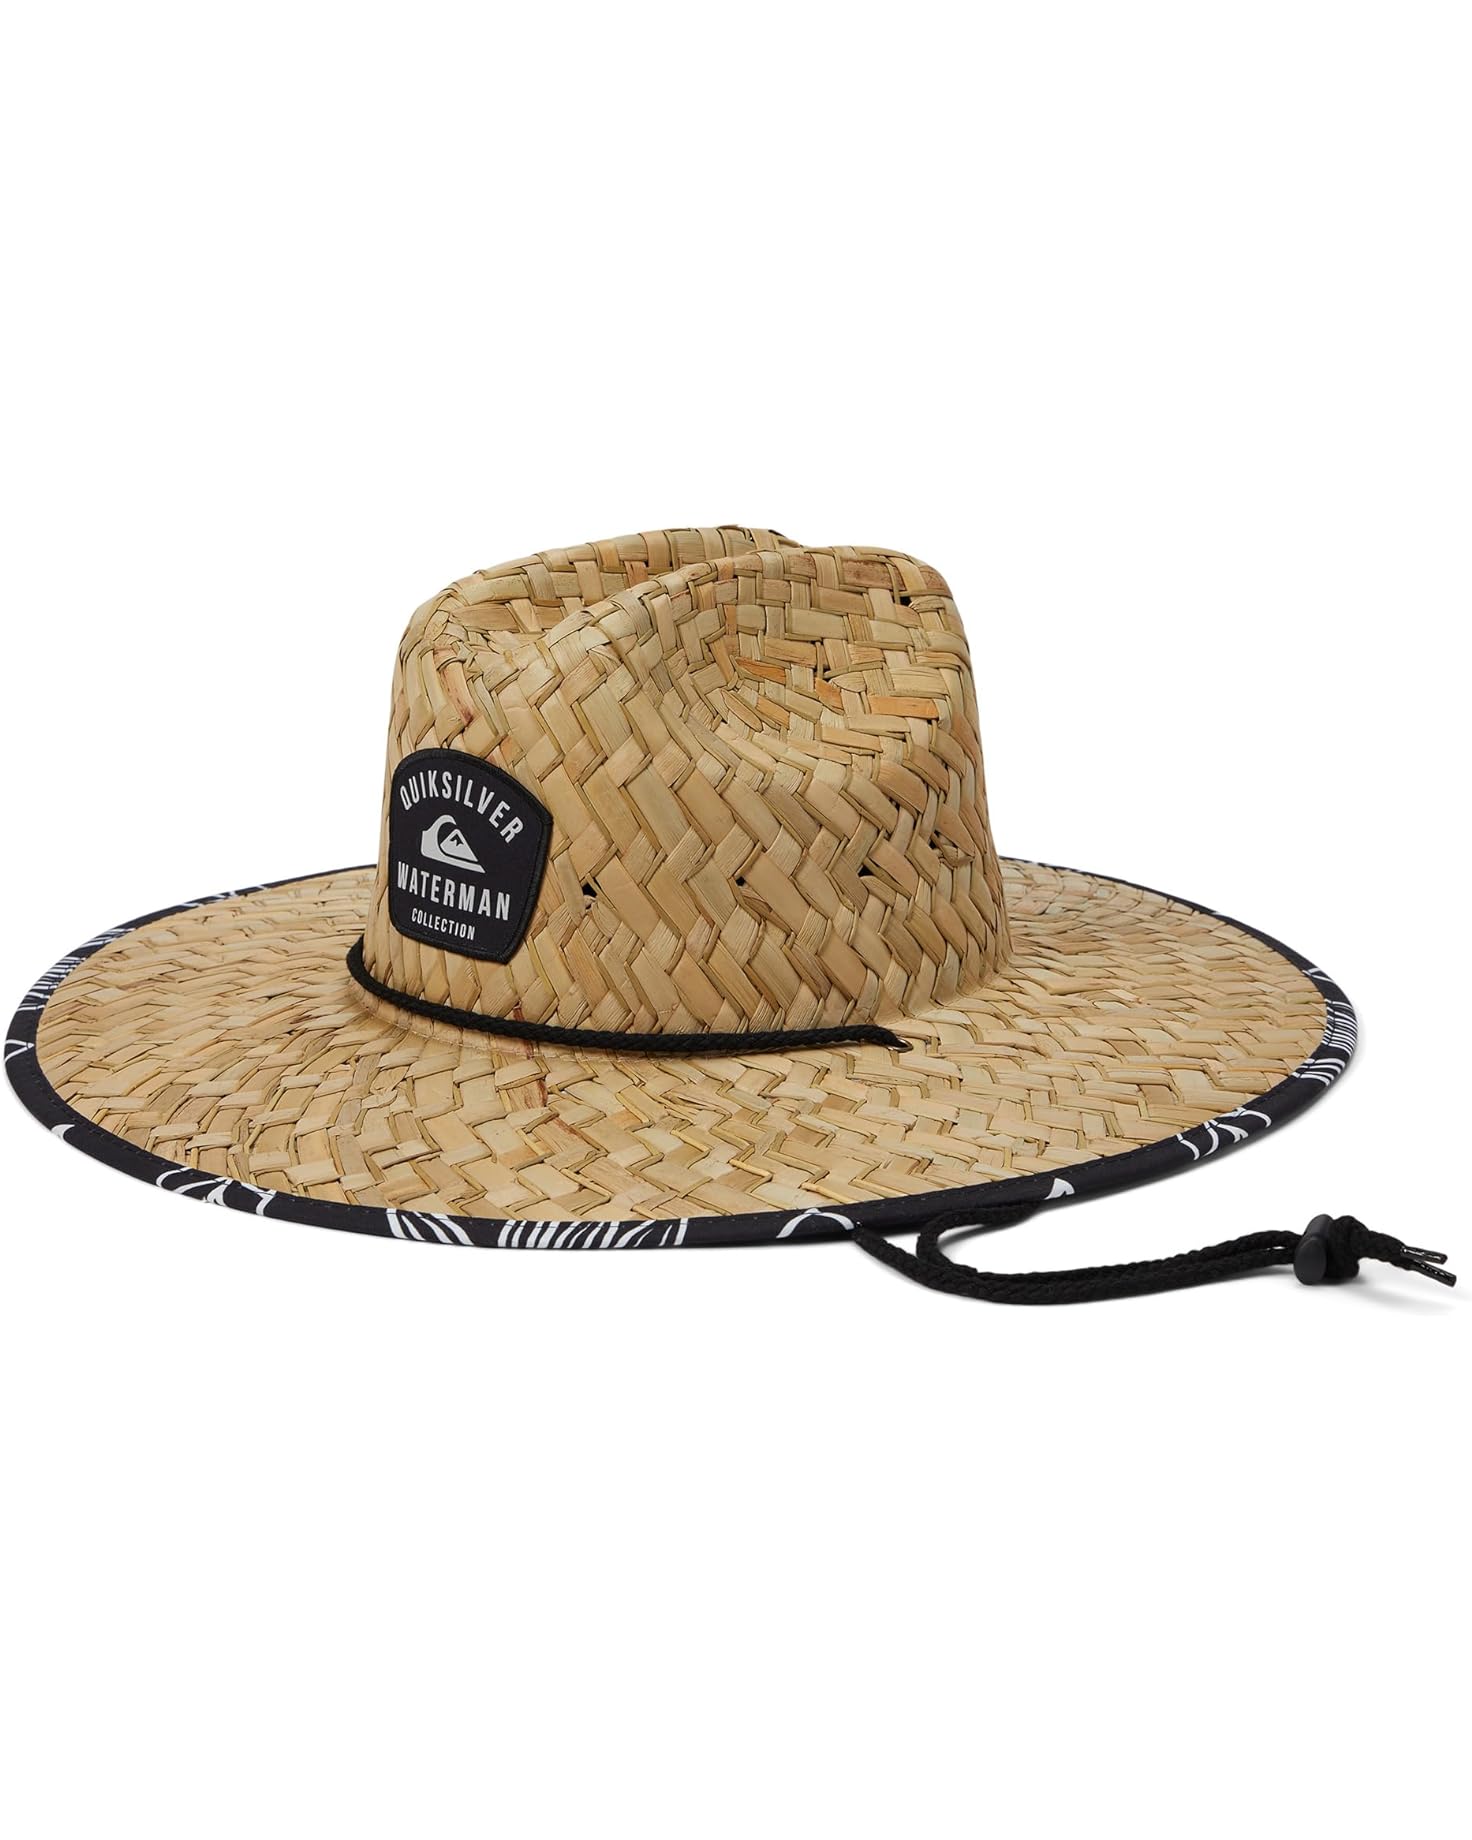 Quicksilver Men's Waterman Outsider Straw Sun Hat (SM/MD or LG/XL) $12.30 + Free Shipping